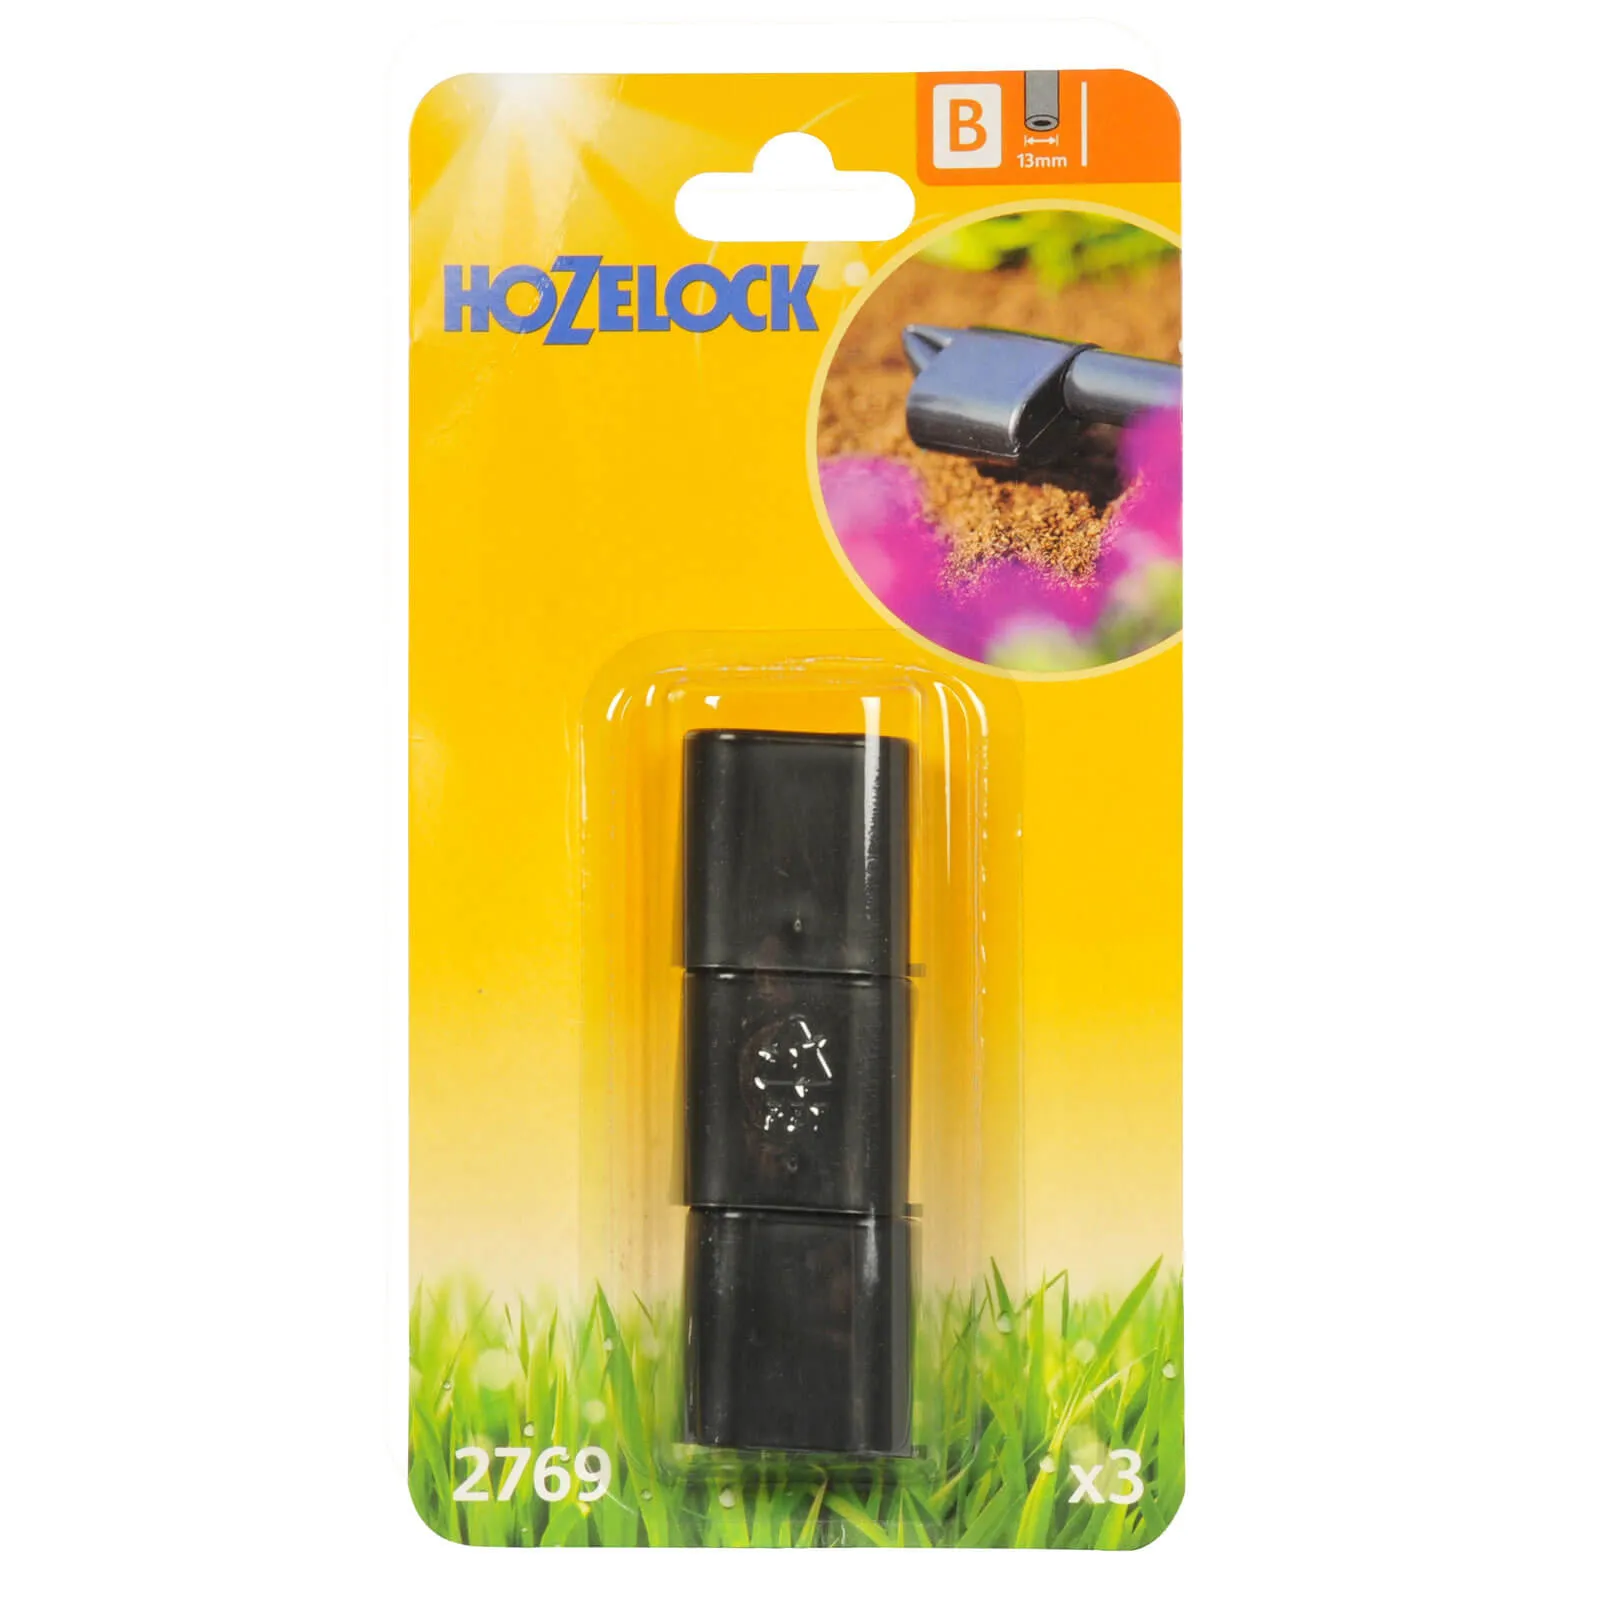 Hozelock CLASSIC MICRO End Plug - 1/2" / 12.5mm, Pack of 3